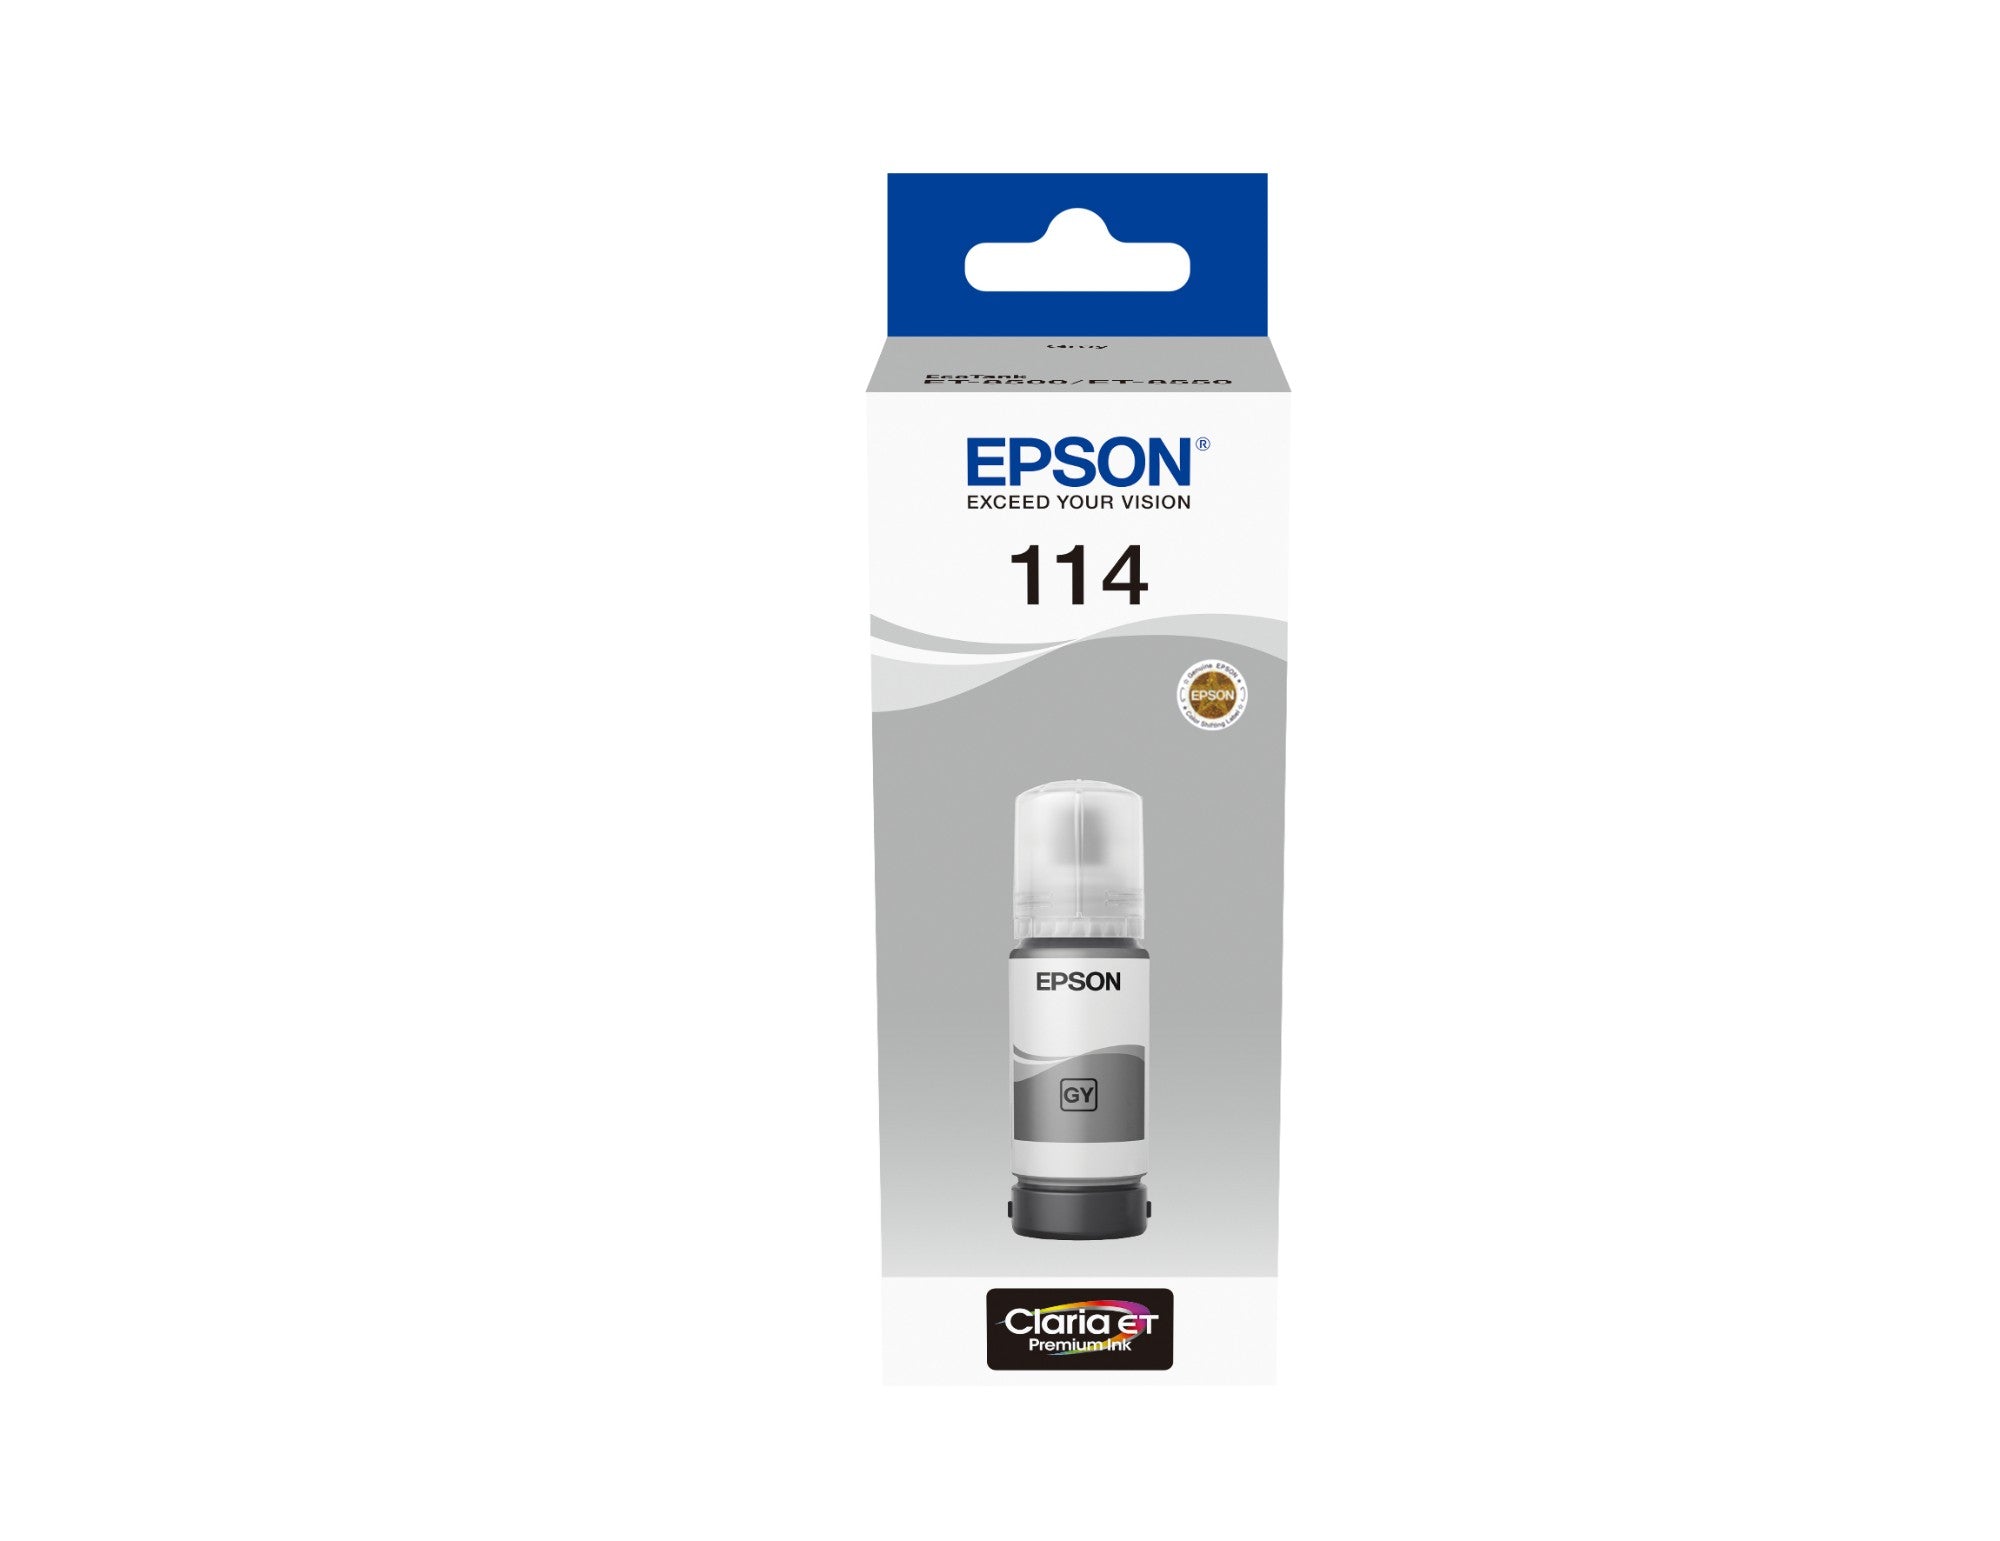 Epson C13T07B540/114 Ink bottle gray, 6.7K pages 2300 Photos 70ml for Epson ET-8500